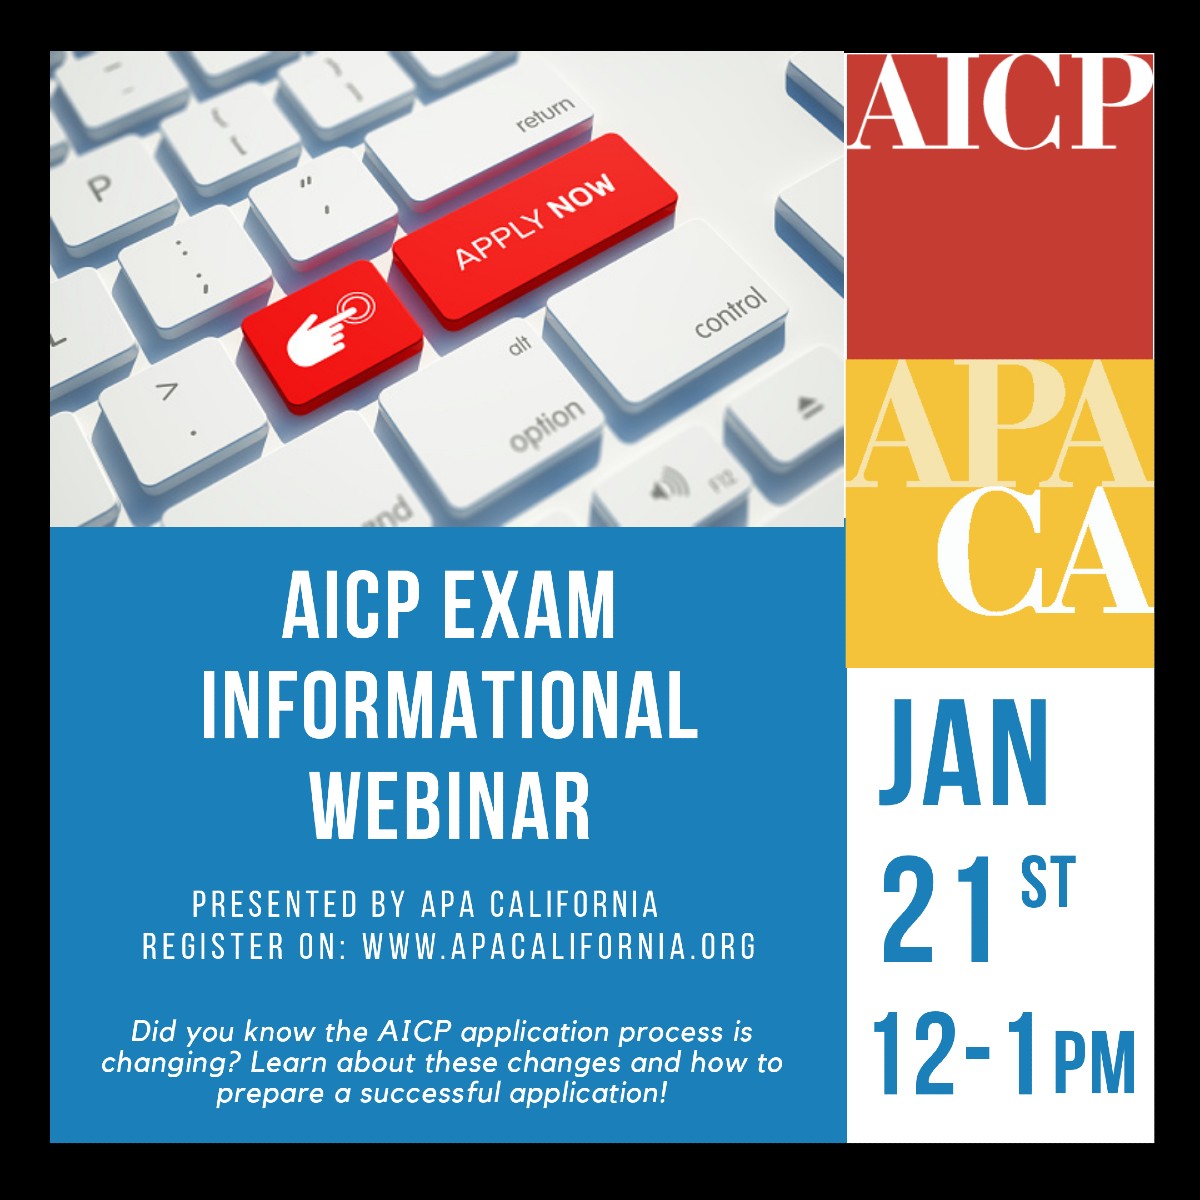 Did you know the AICP application porcess is changing? Learn about these changes and how to prepare a successful application!